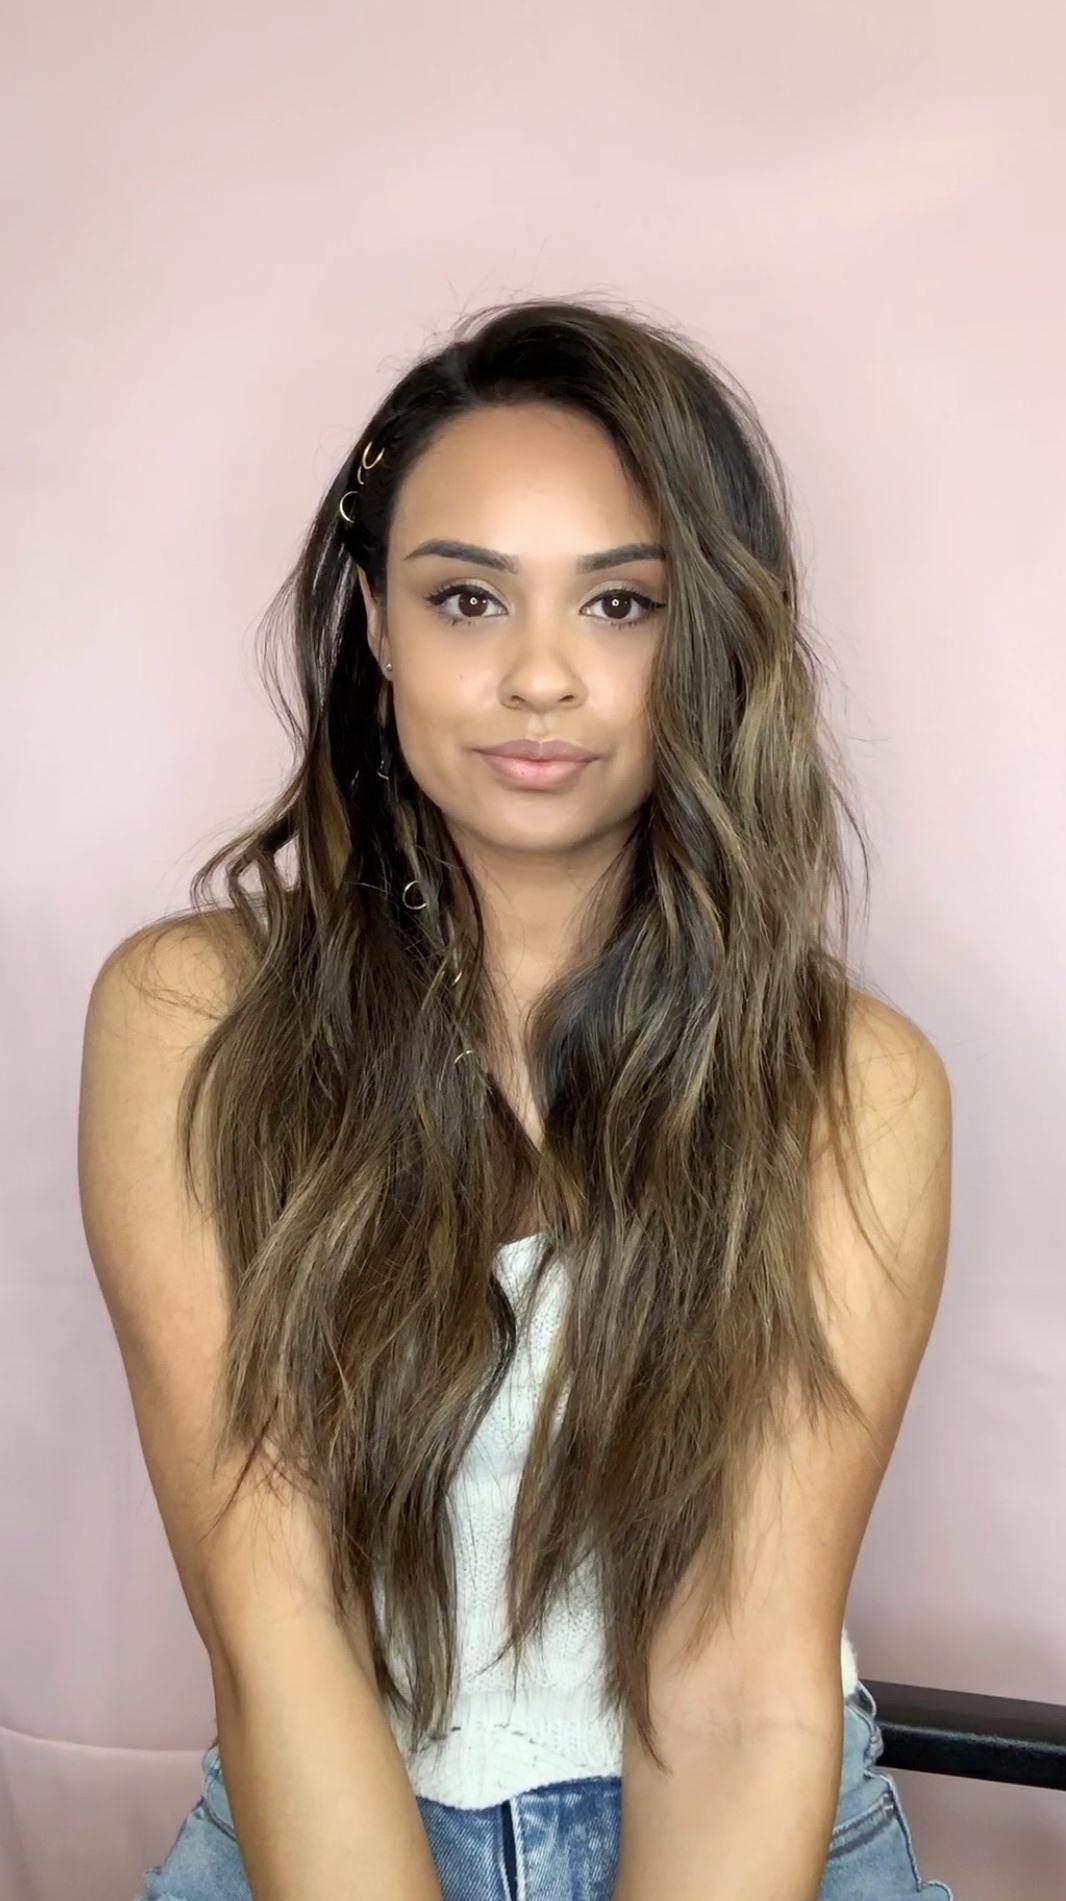 7 Cute Party Hairstyles with Video Tutorials by Cynthia Dhimdis